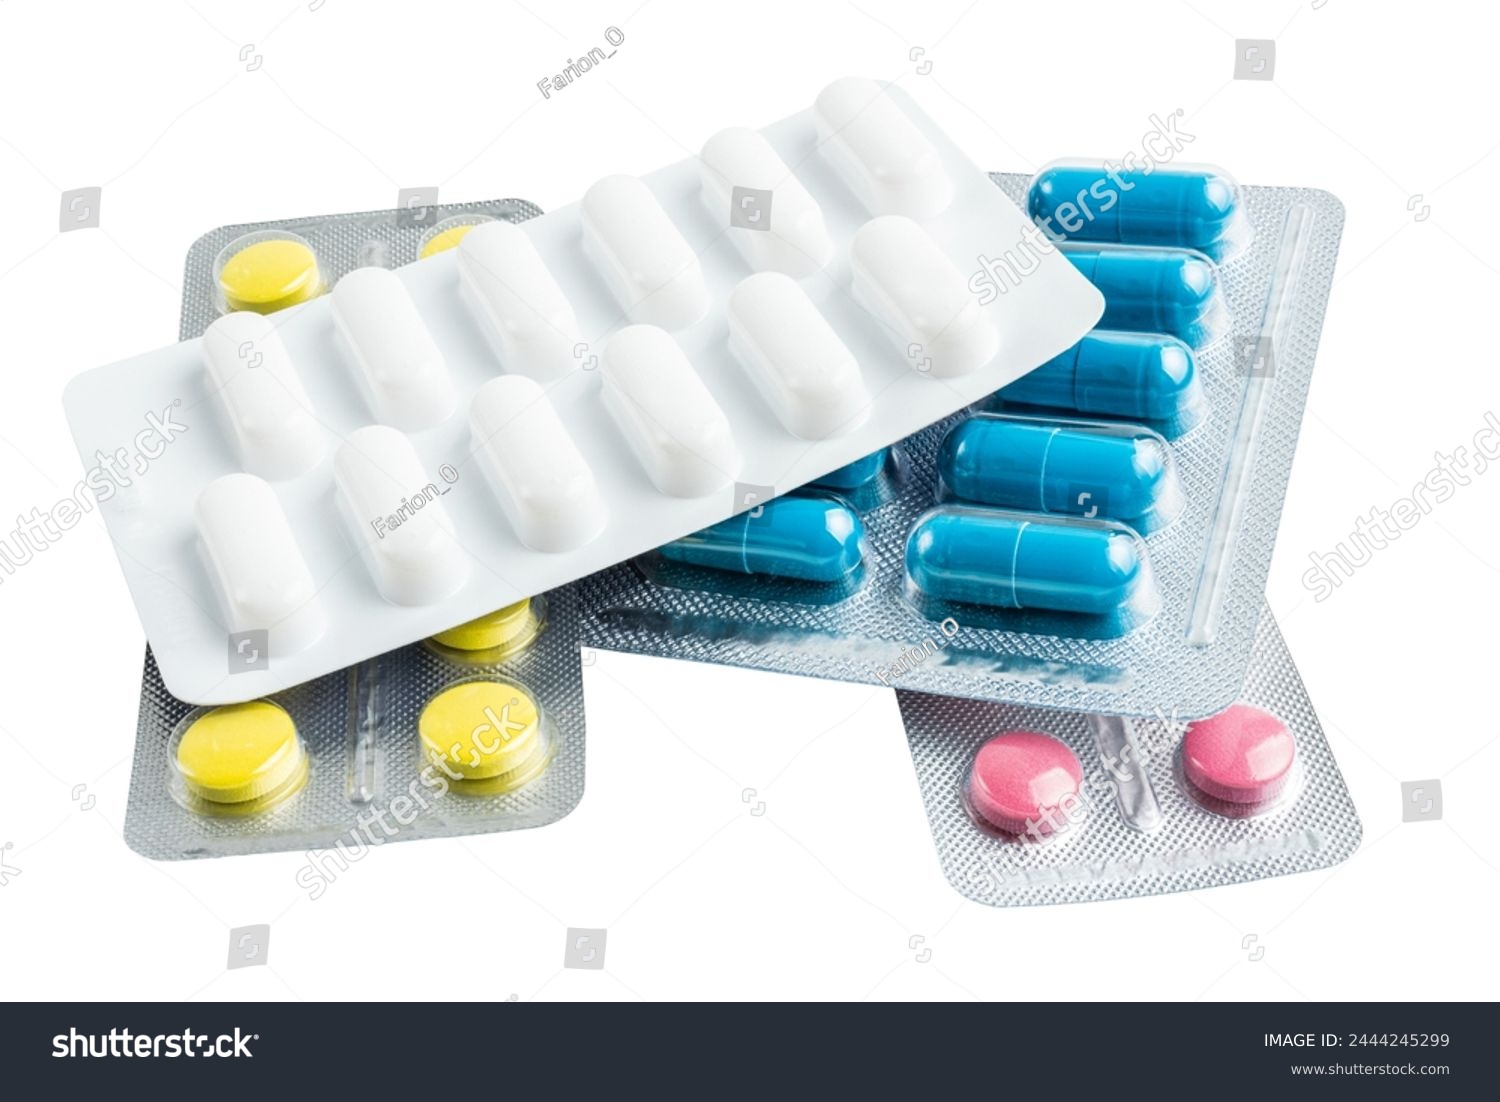 Various medicine capsules, pills and tablets in a blister pack isolated on white background, healthcare and medicine concept. #2444245299